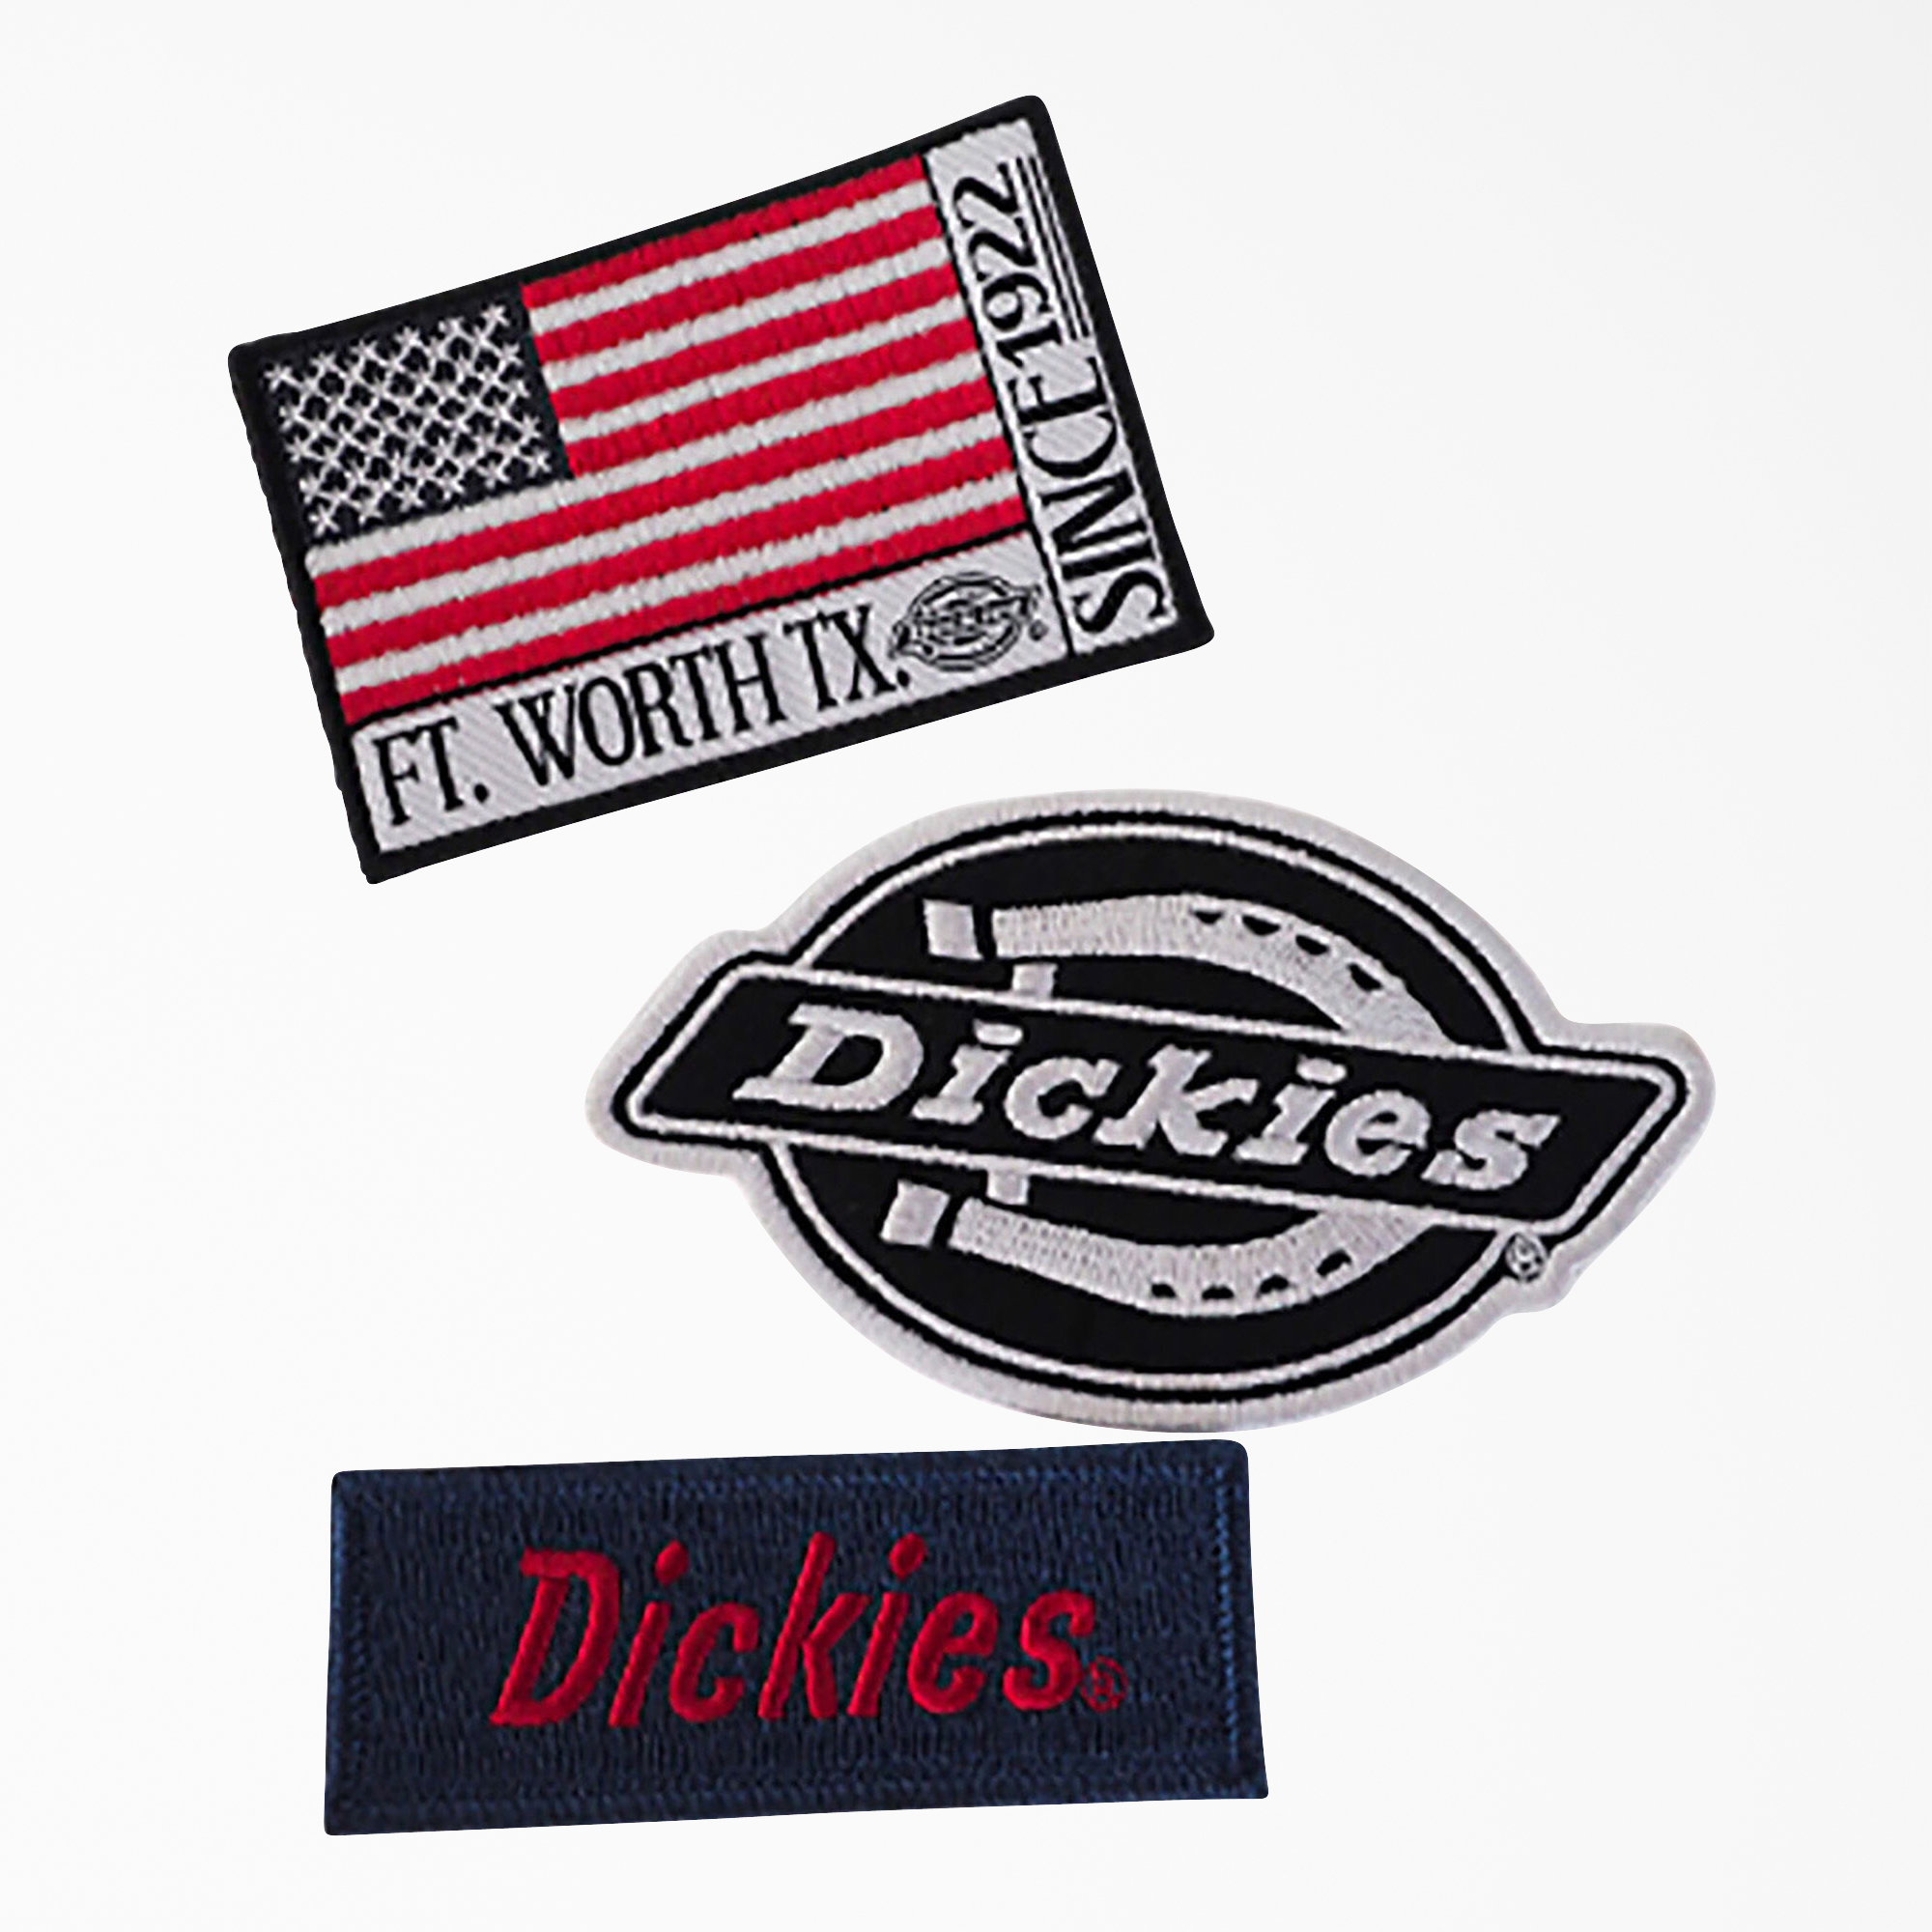 Dickies Logo Iron-on Patches, 3-Pack - Assorted Colors (QA)